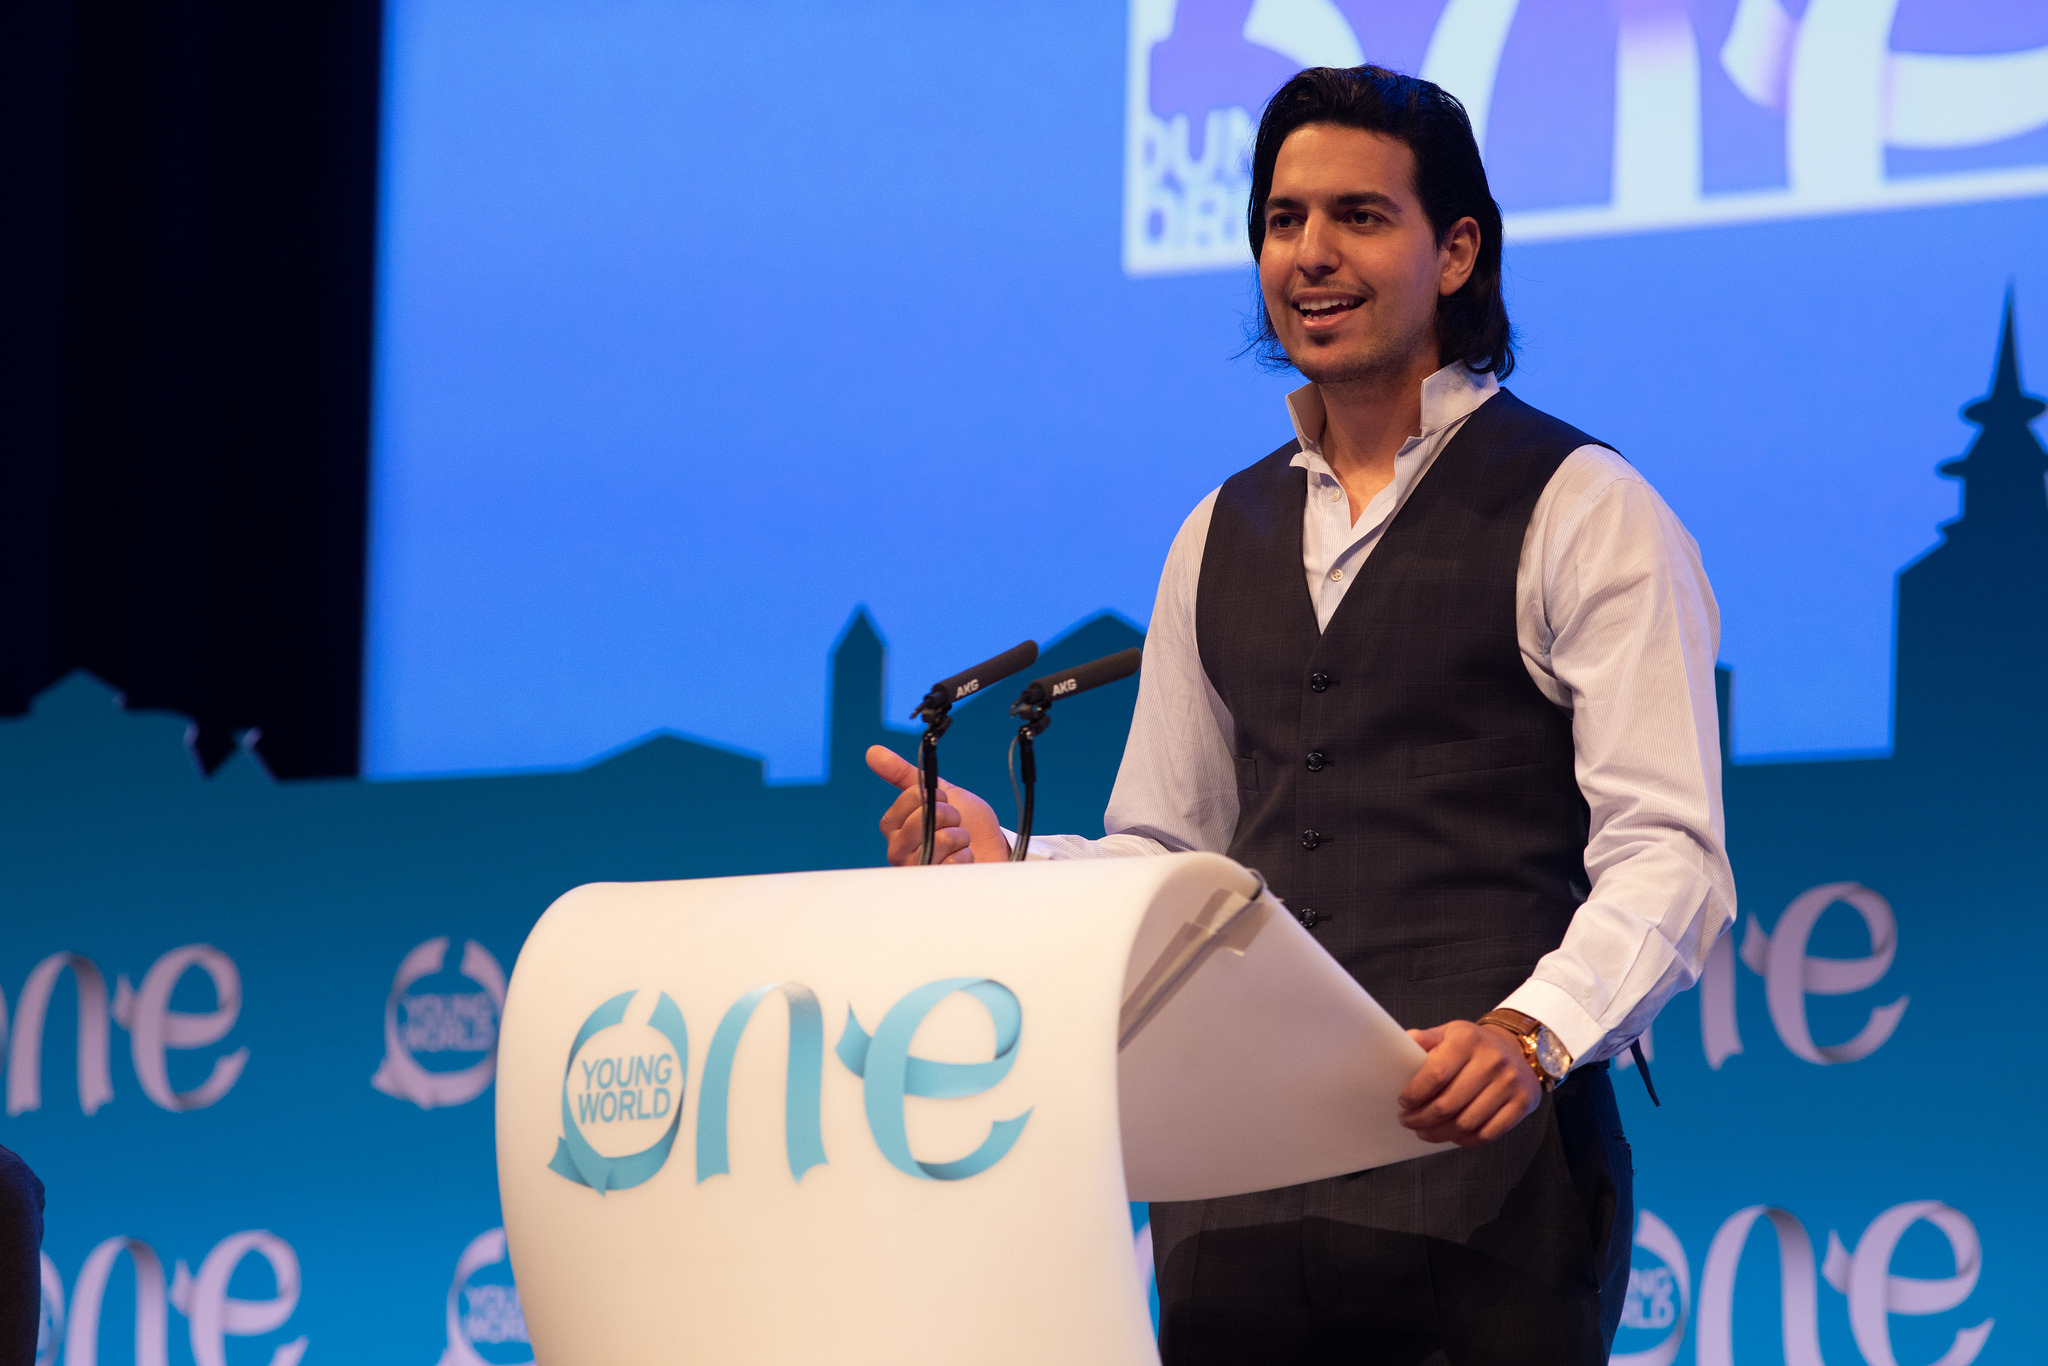 charif hamidi, oyw, one young world, brighton kaoma, prince harry, impact, leaders, young leaders